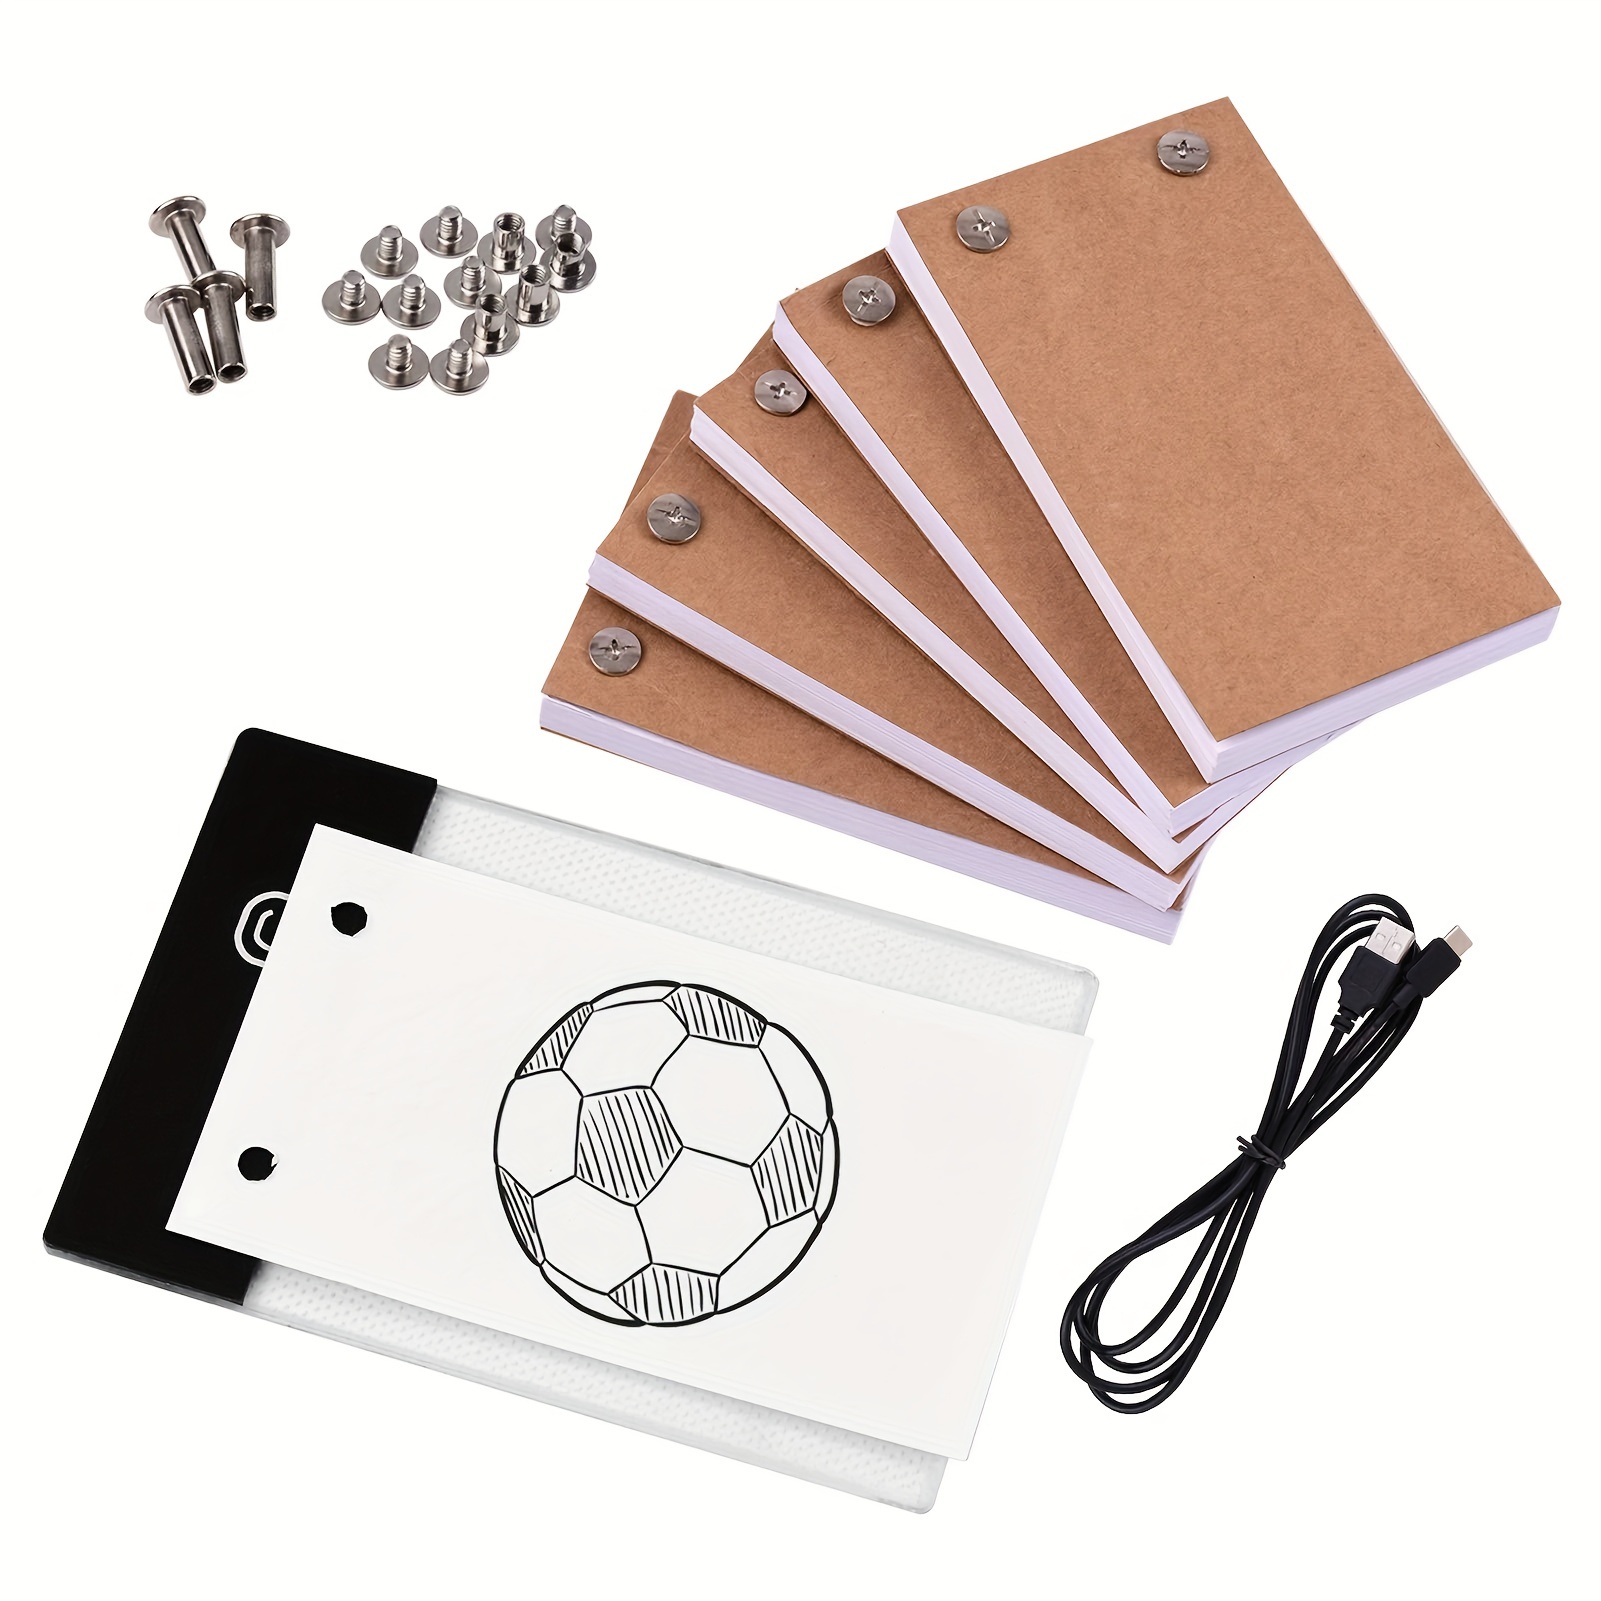 Flip Book Kit with A4 Light Pad - Includes 240 Algeria